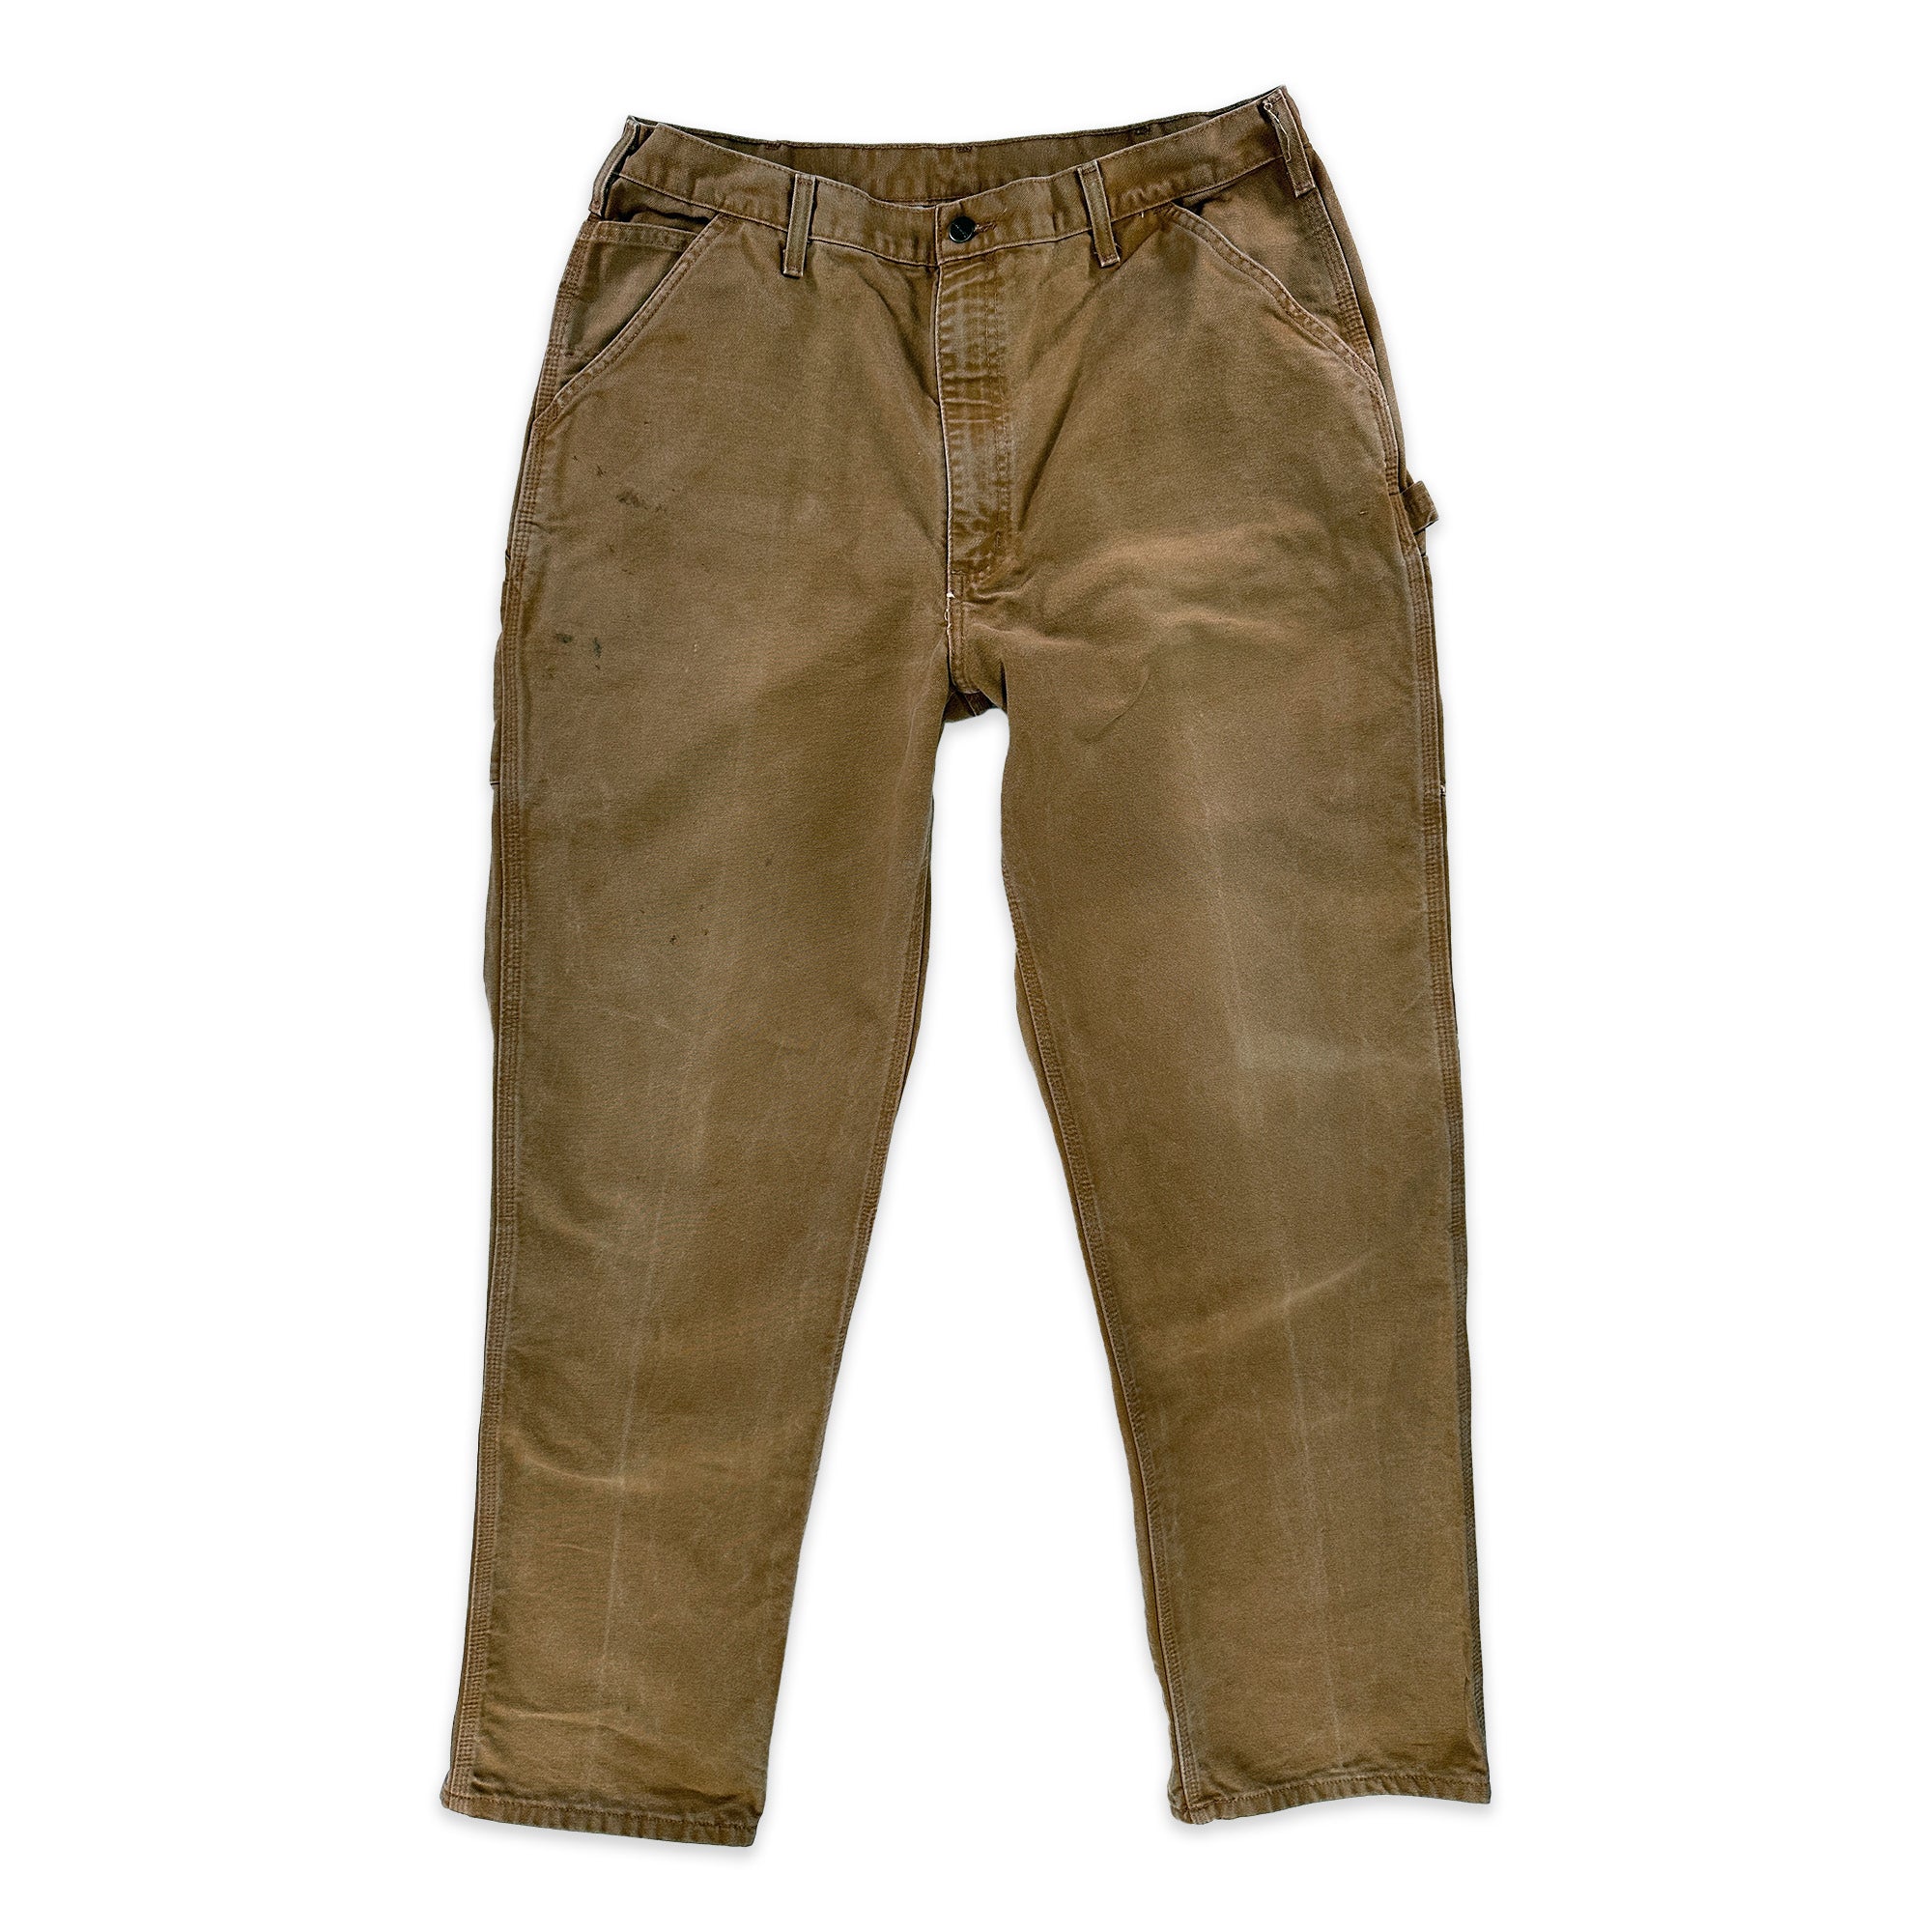 Carhartt B11 BRN Washed Duck Loose Fit Pant - Men's 36x34-1